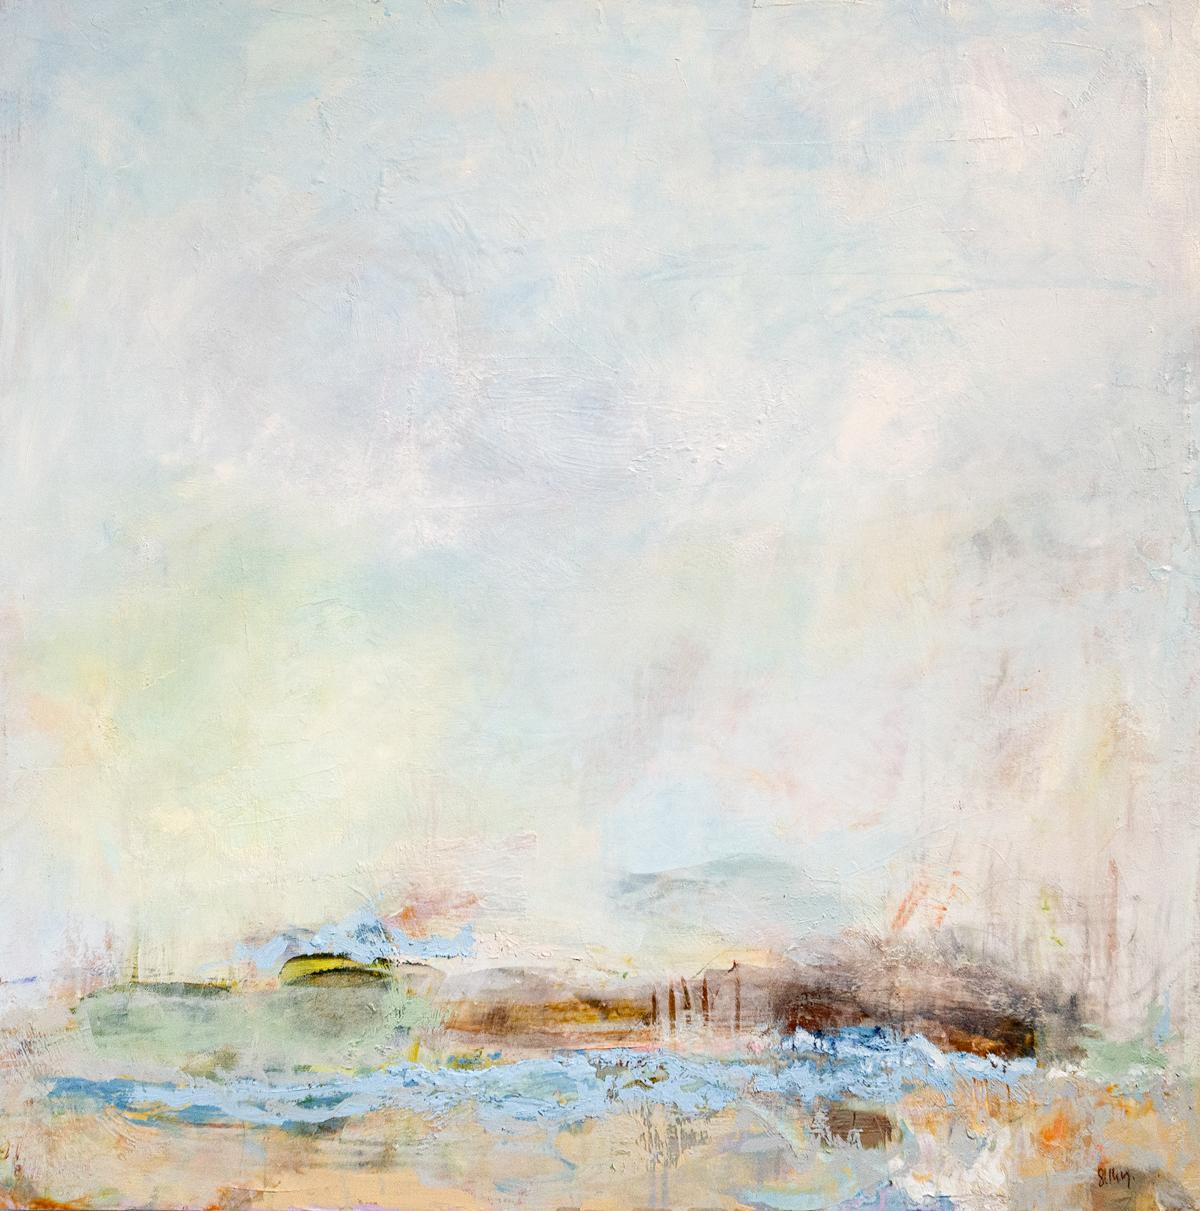 Roam - soft, cool, textured, abstracted landscape, mixed media, acrylic on panel